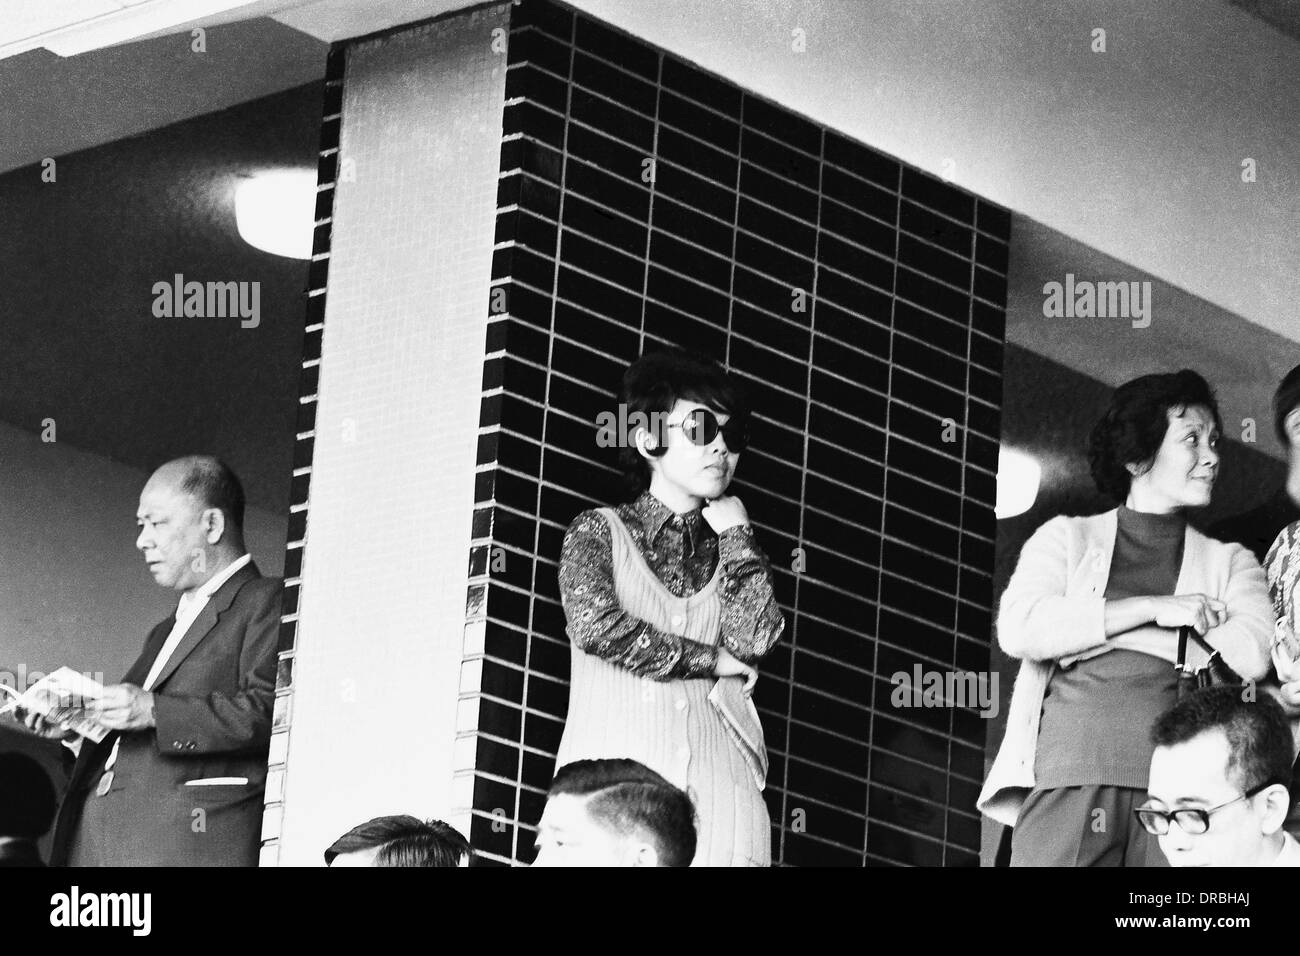 Anxious standing people at race course, Hong Kong, 1971 Stock Photo